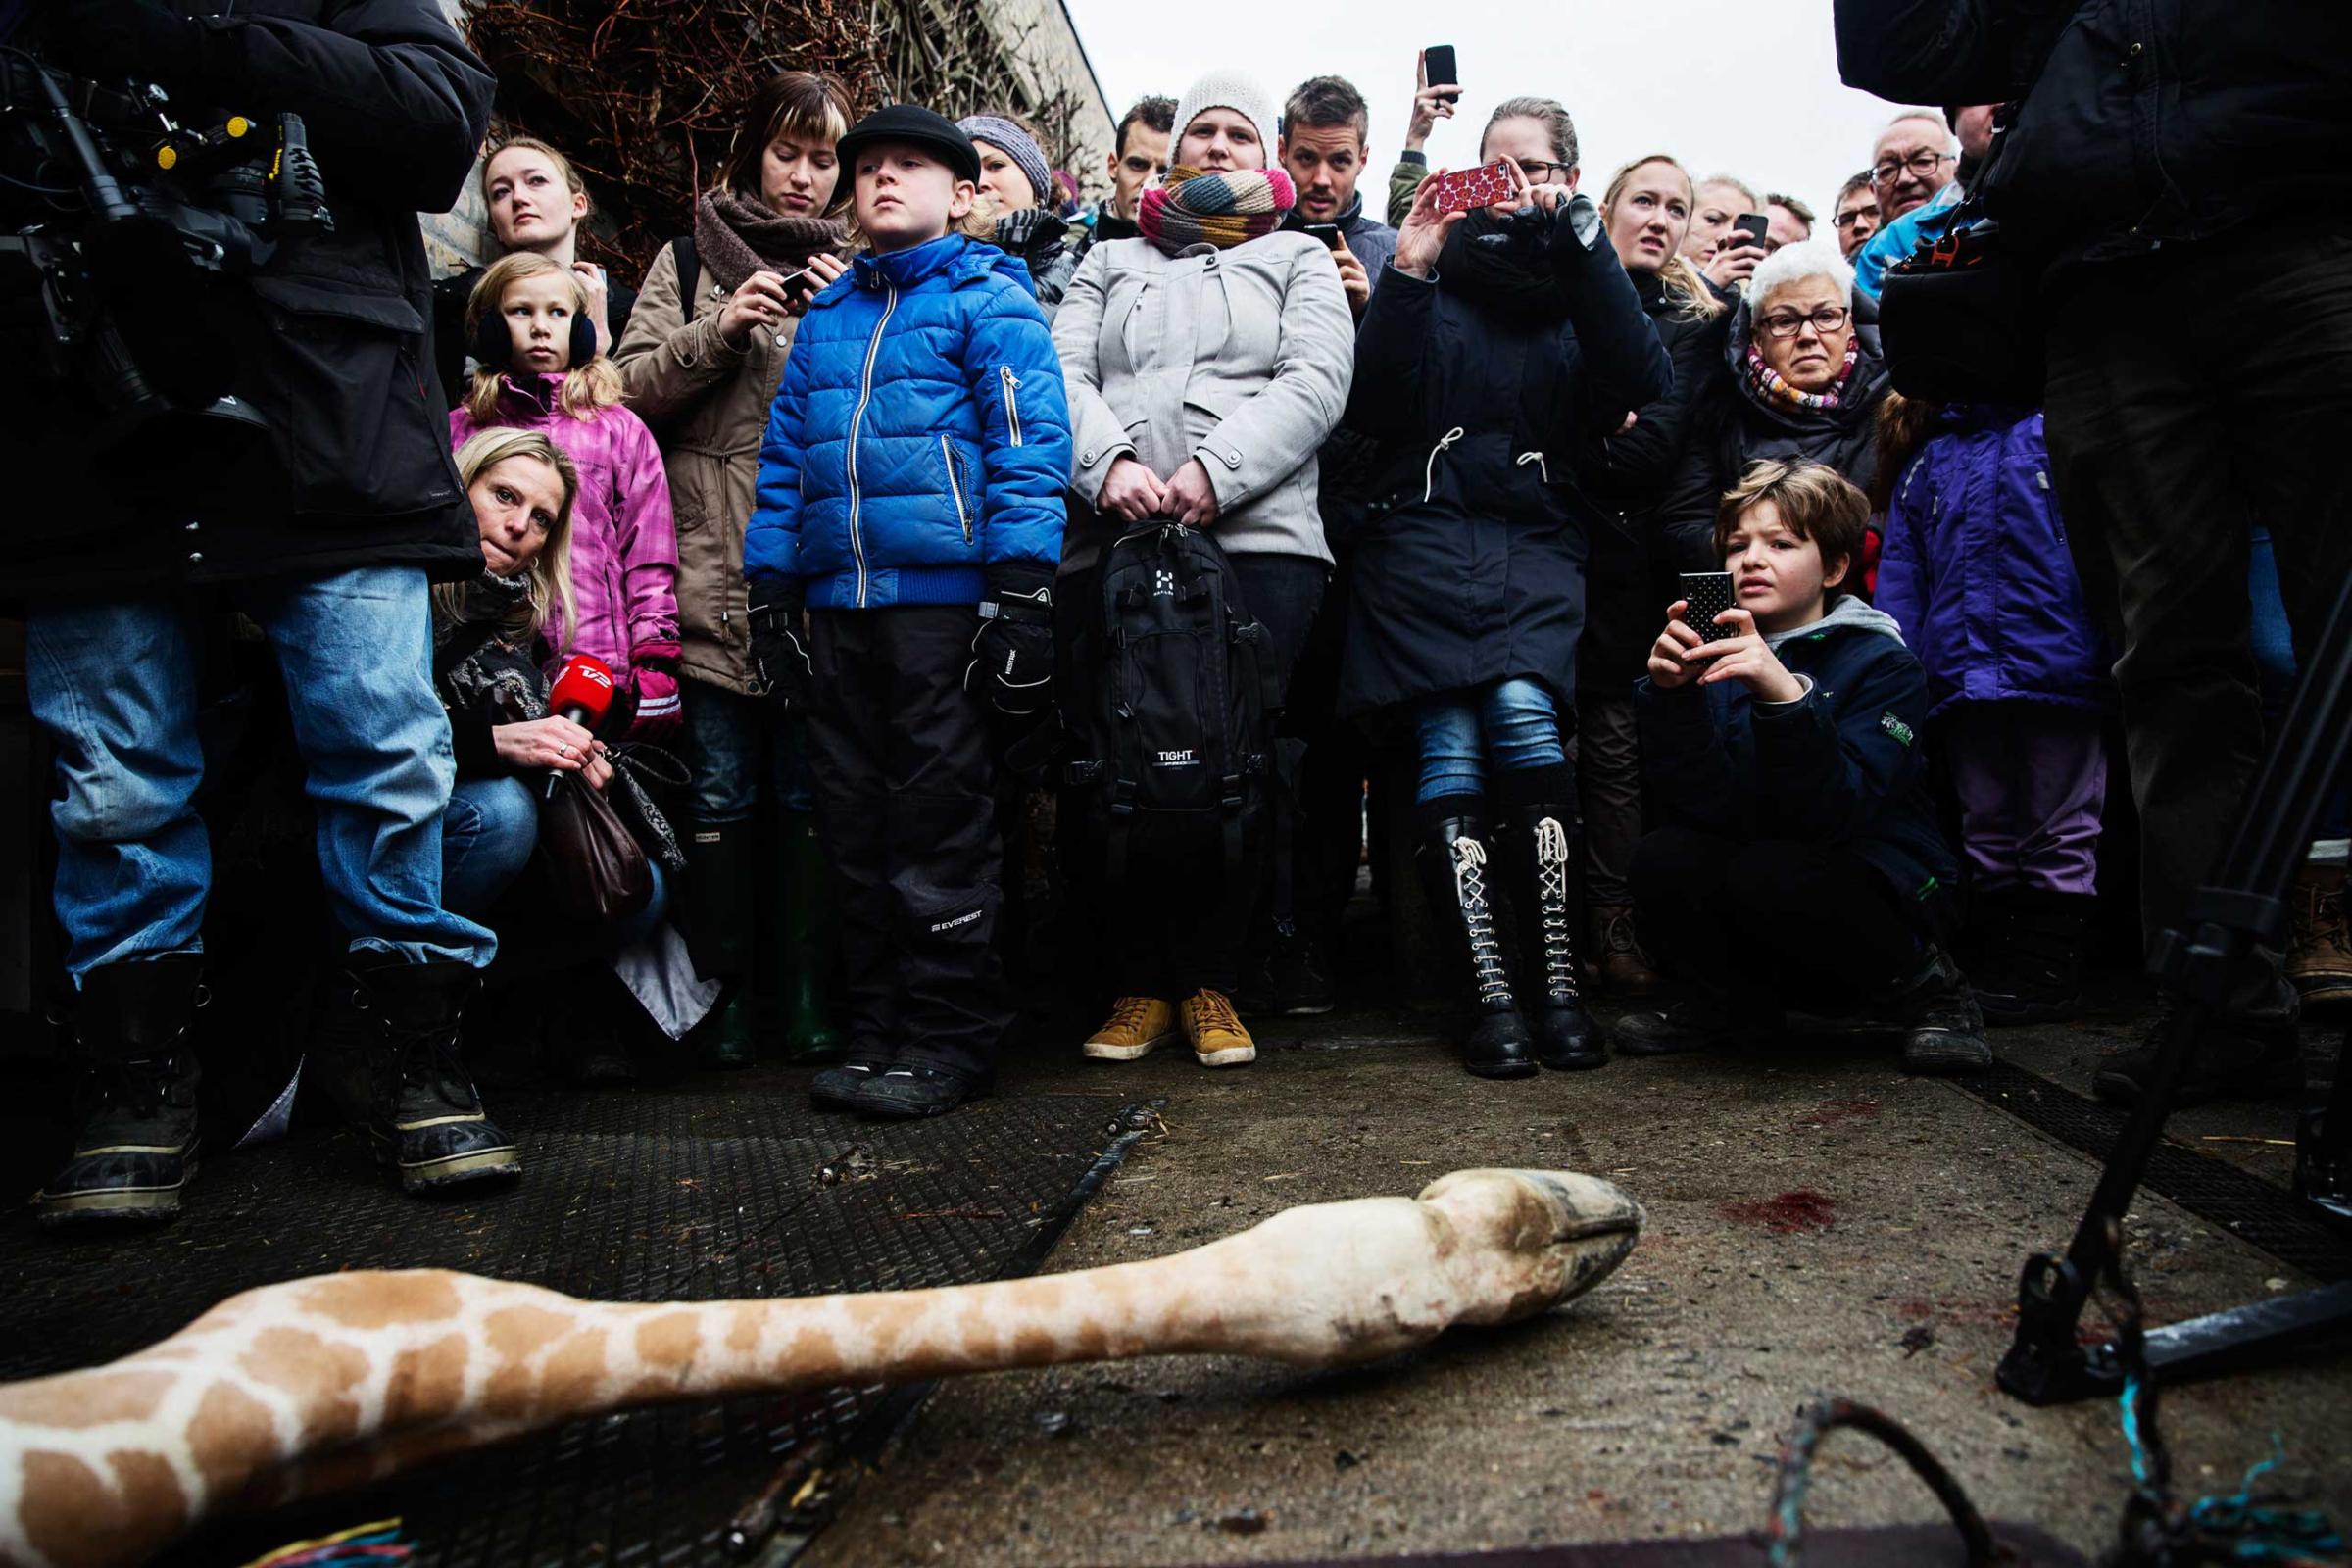 People look at the carcass of the giraffe Marius after it was killed in Copenhagen Zoo, Feb. 9, 2014.